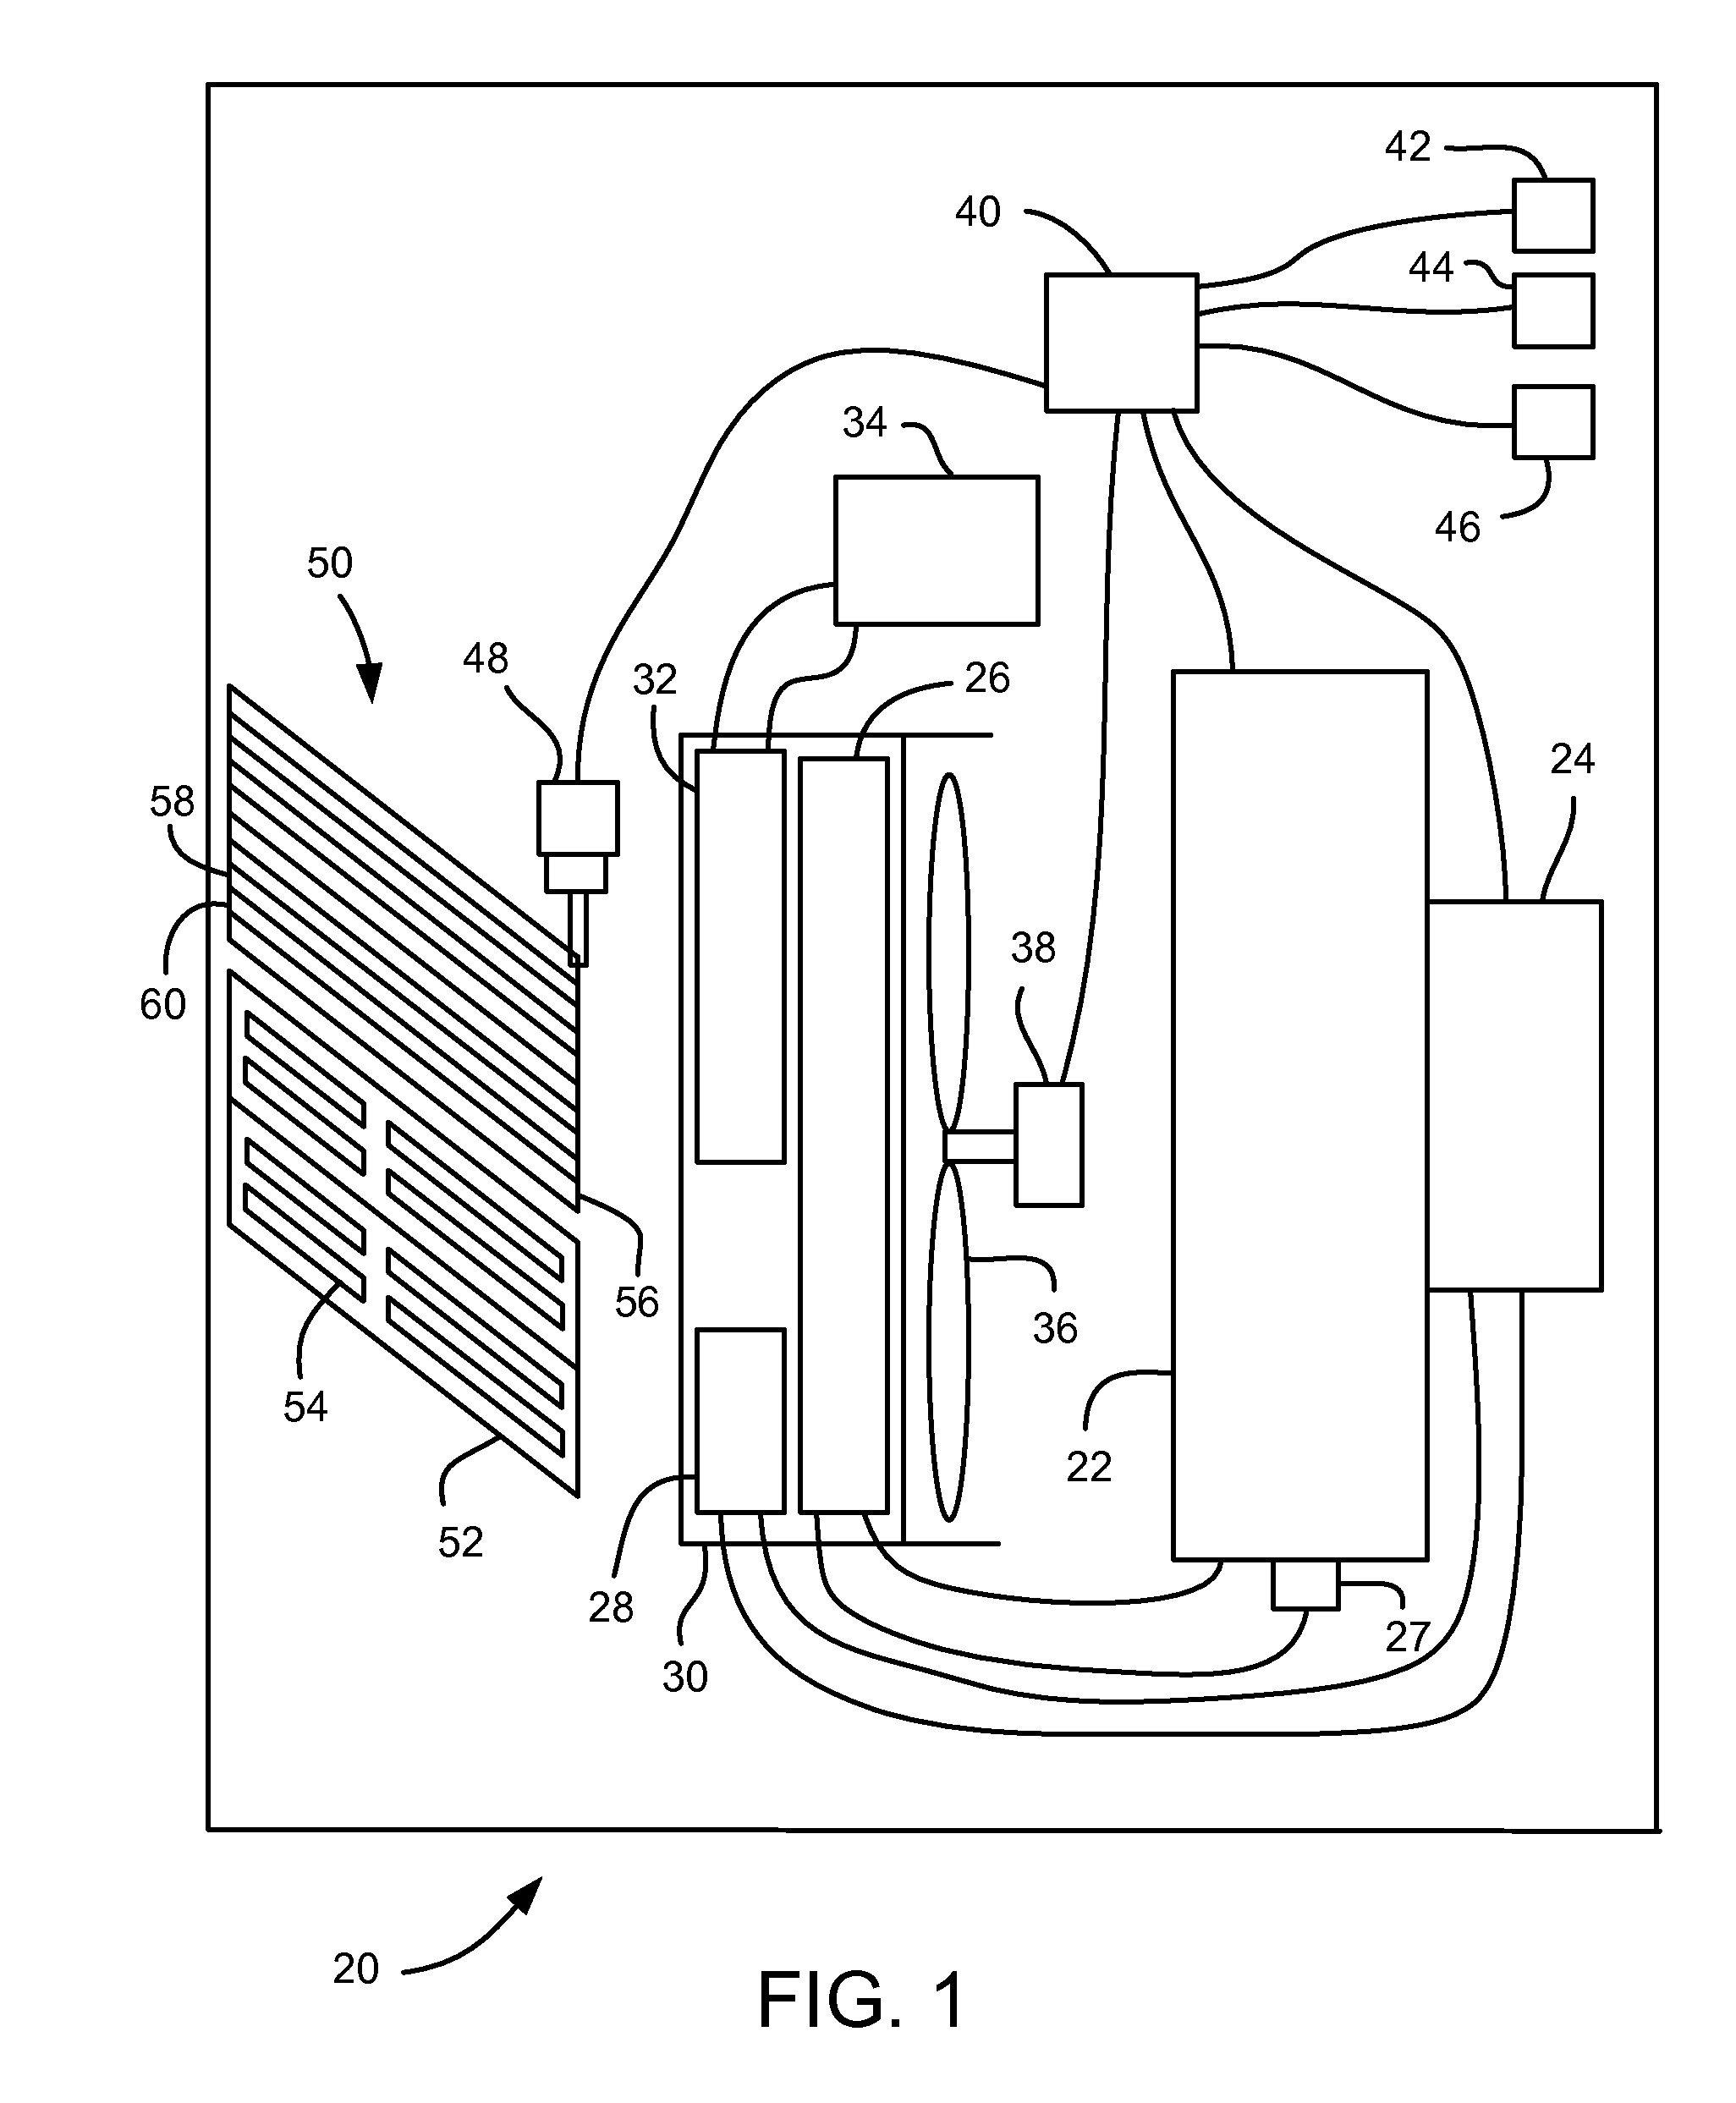 Grille airflow shutter system with discrete shutter control